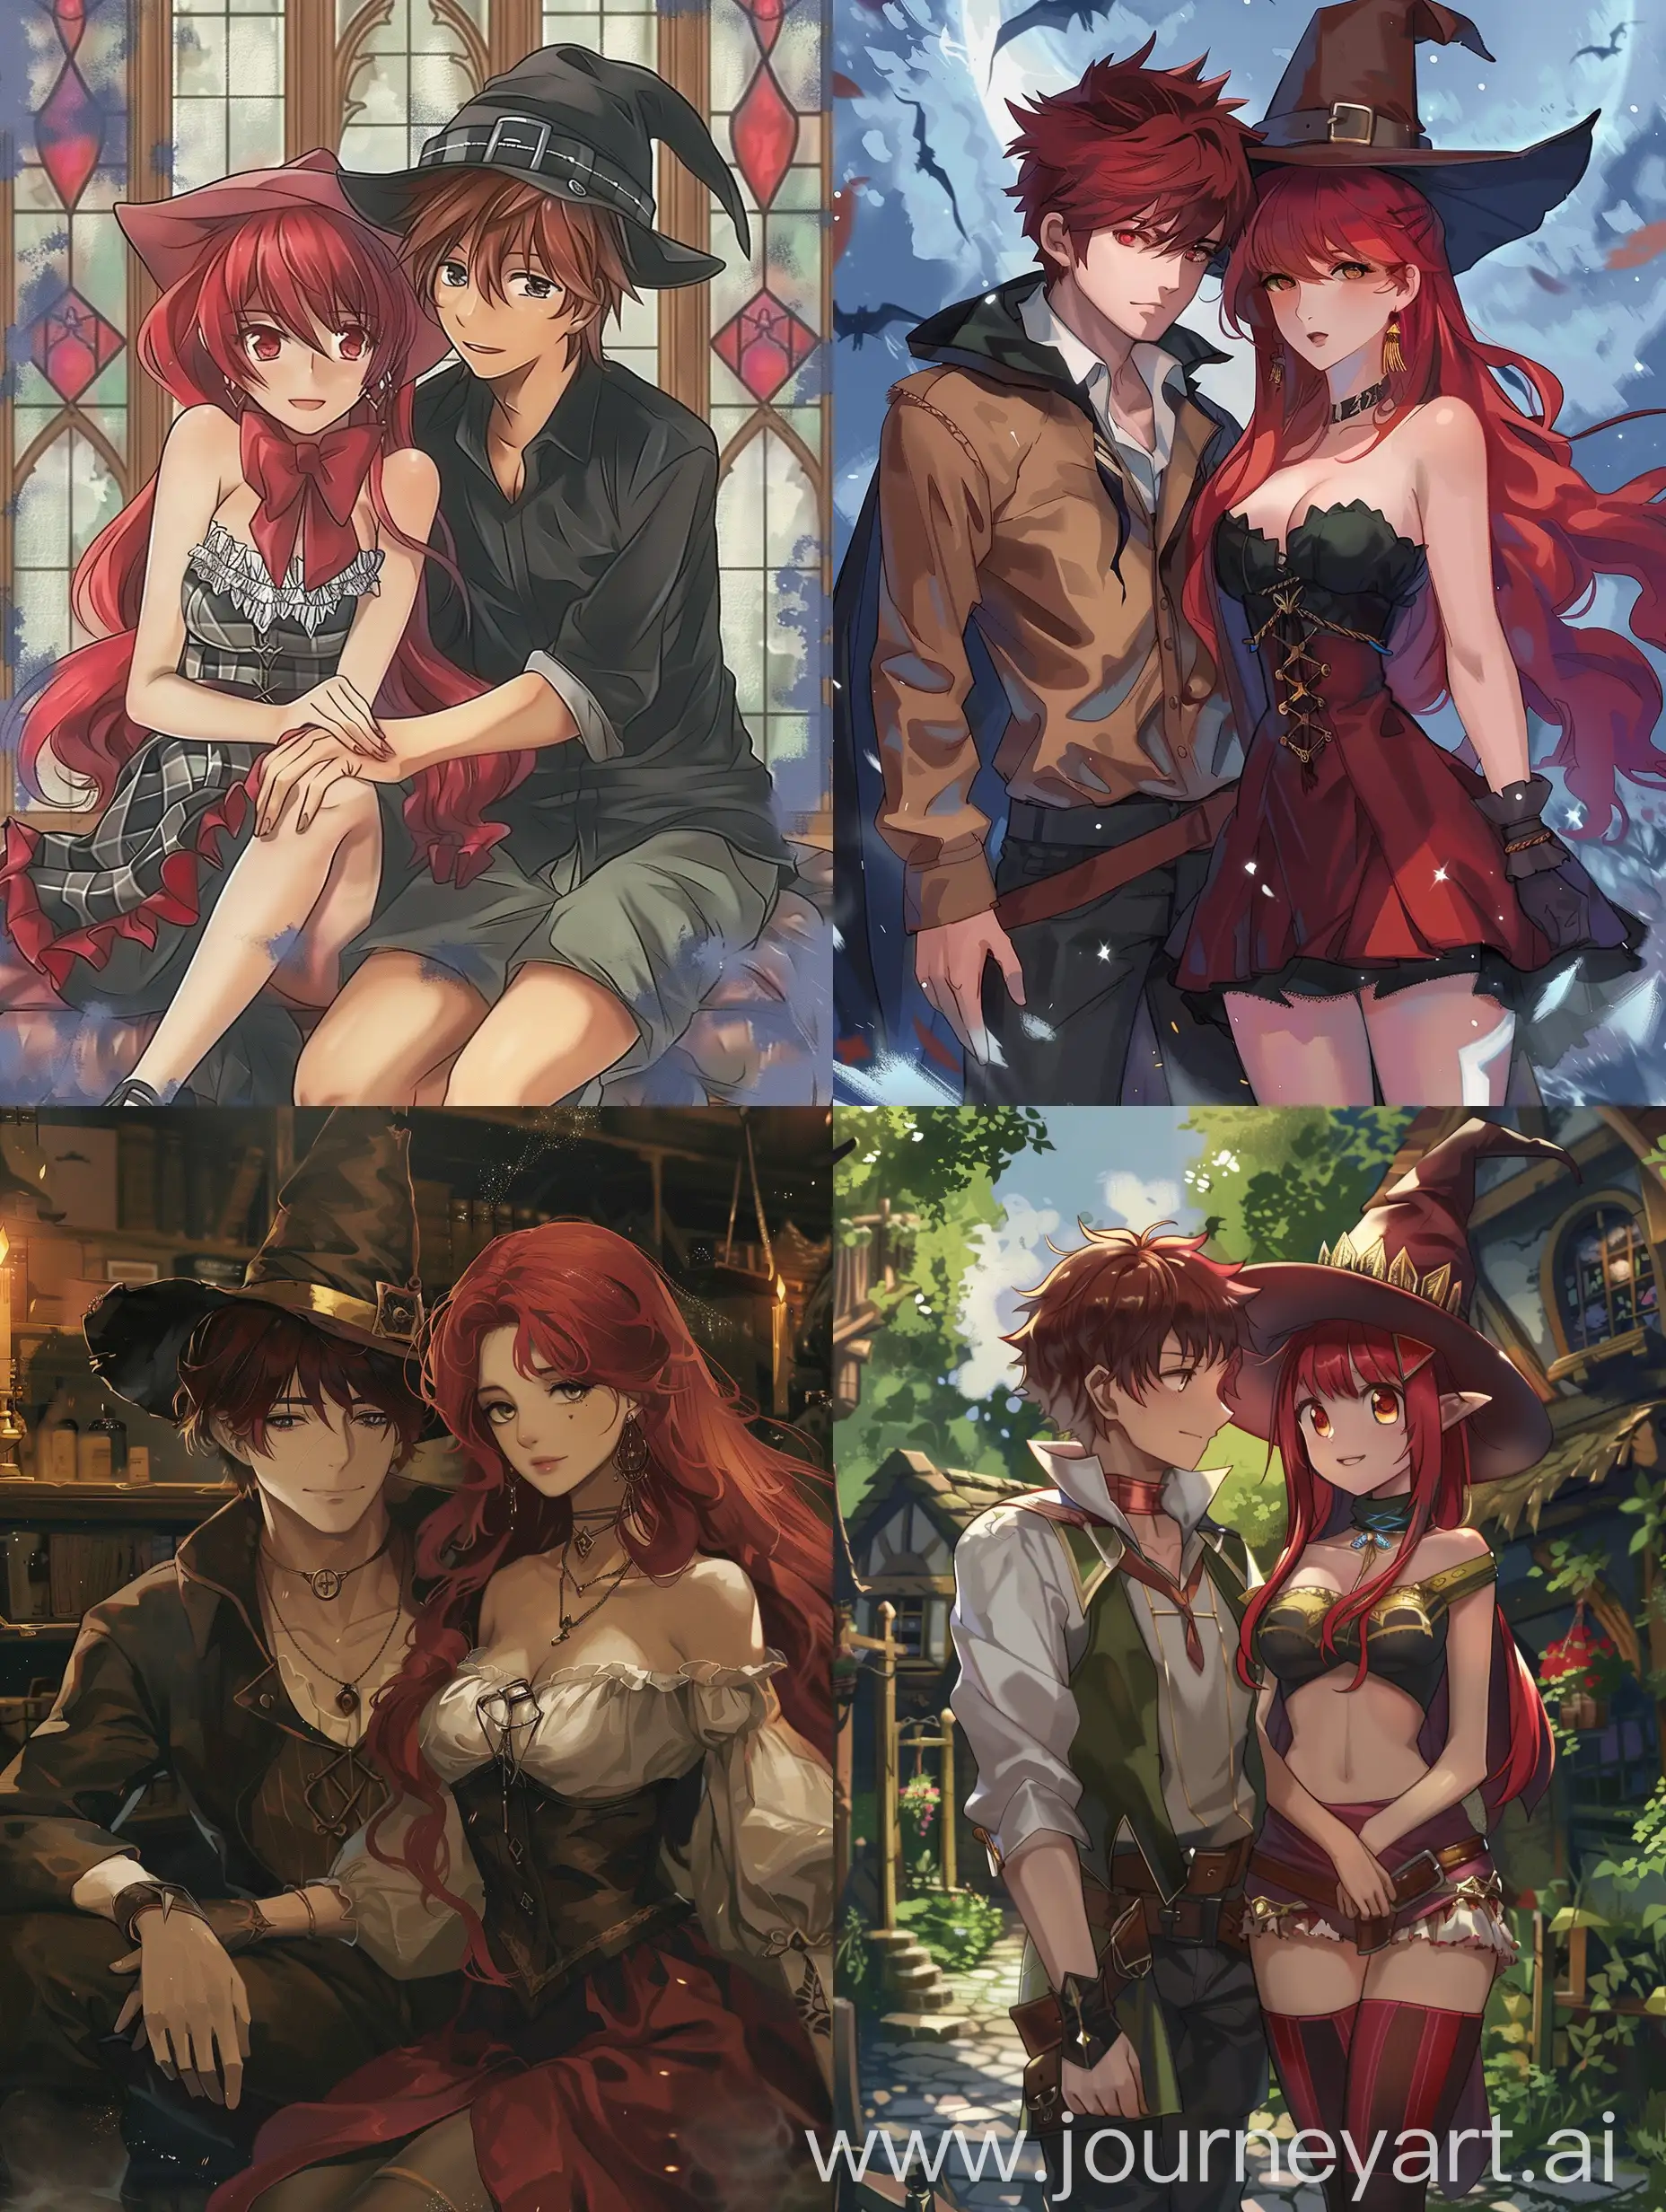 Fantasy-RedHaired-Witch-and-Brunette-Guy-at-Magic-Academy